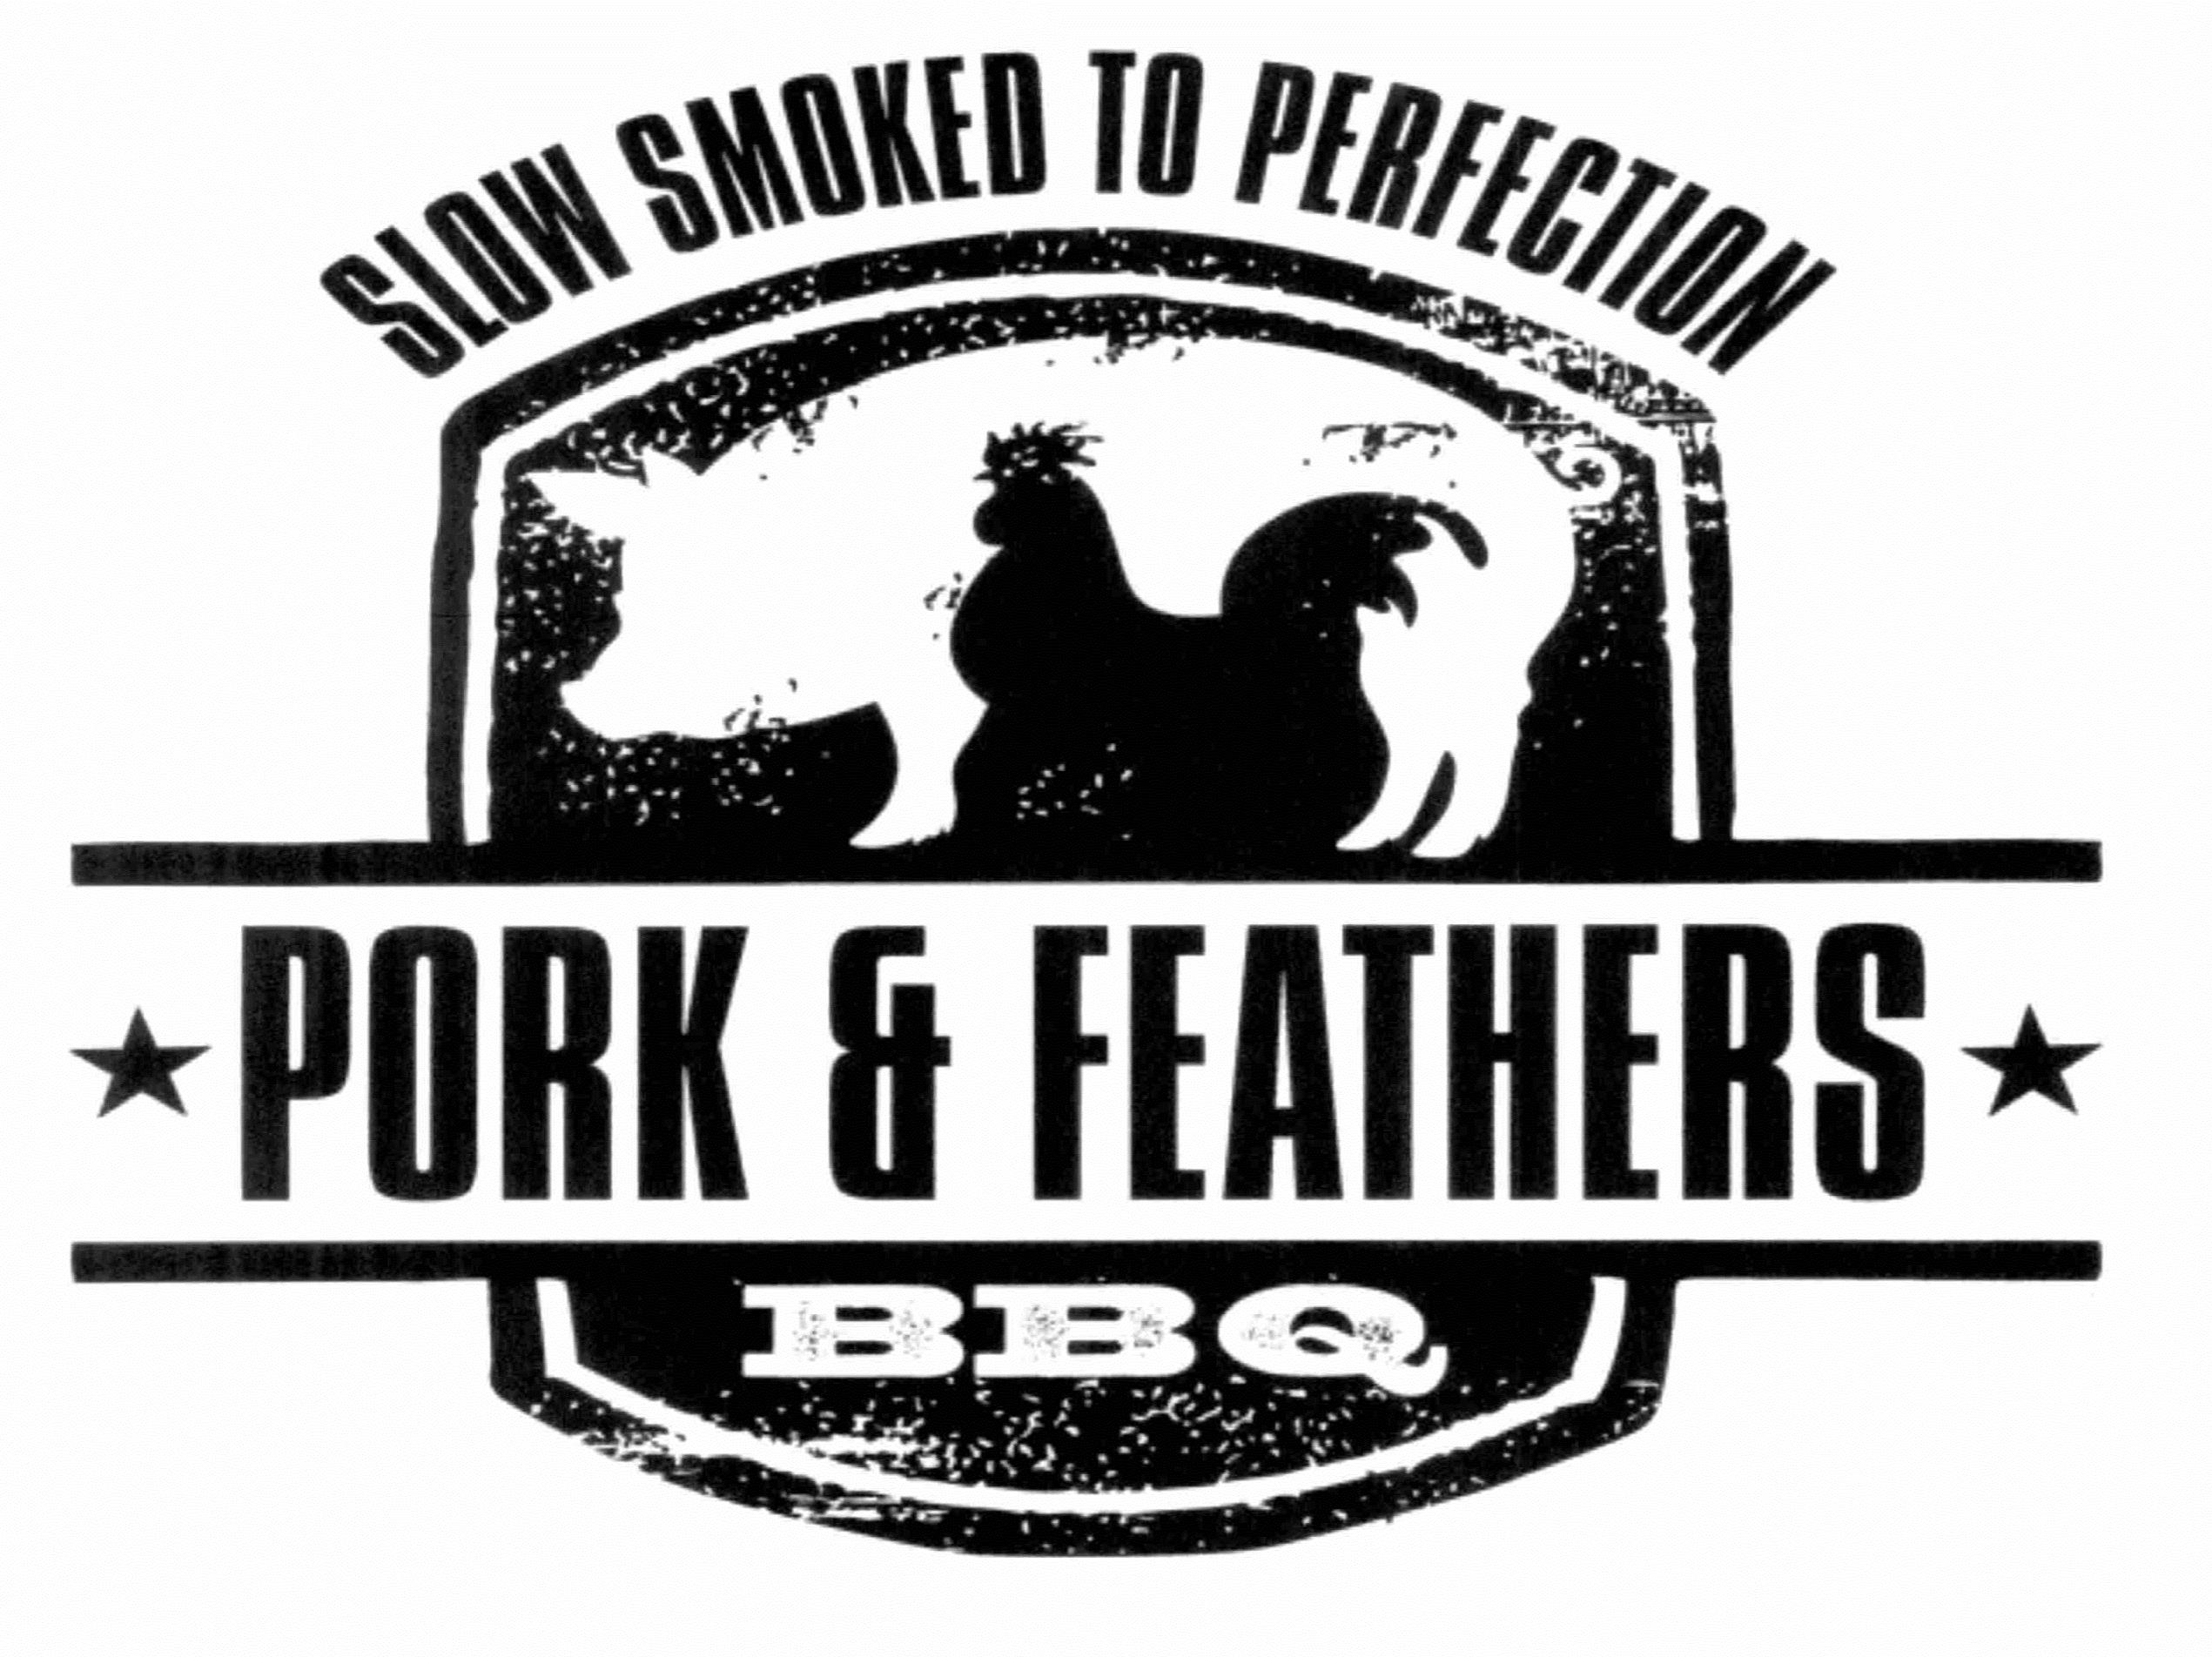  PORK &amp; FEATHERS BBQ SLOW SMOKED TO PERFECTION